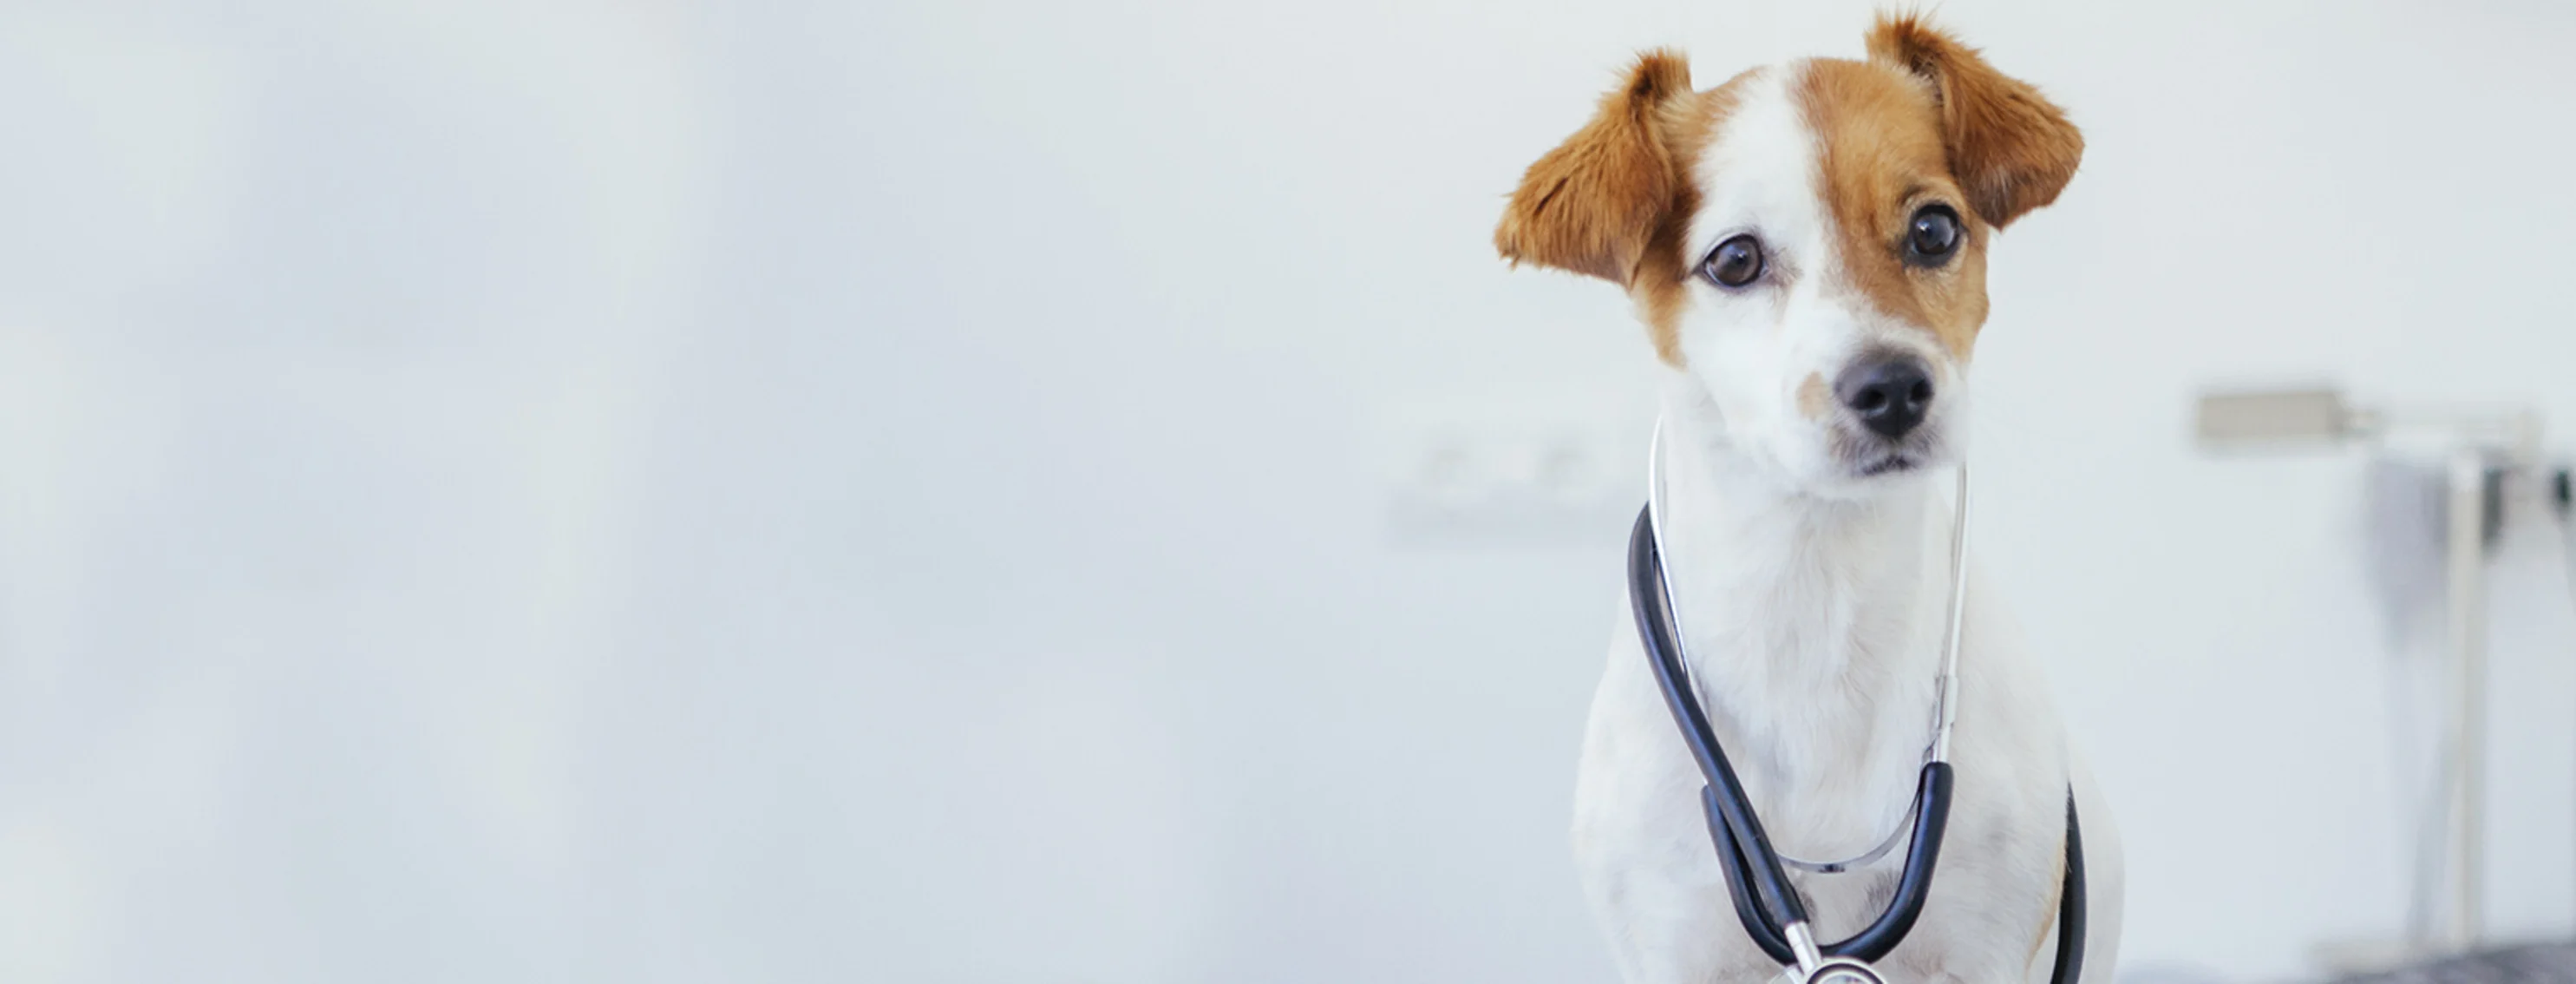 White dog with Brown spots and stethoscope 